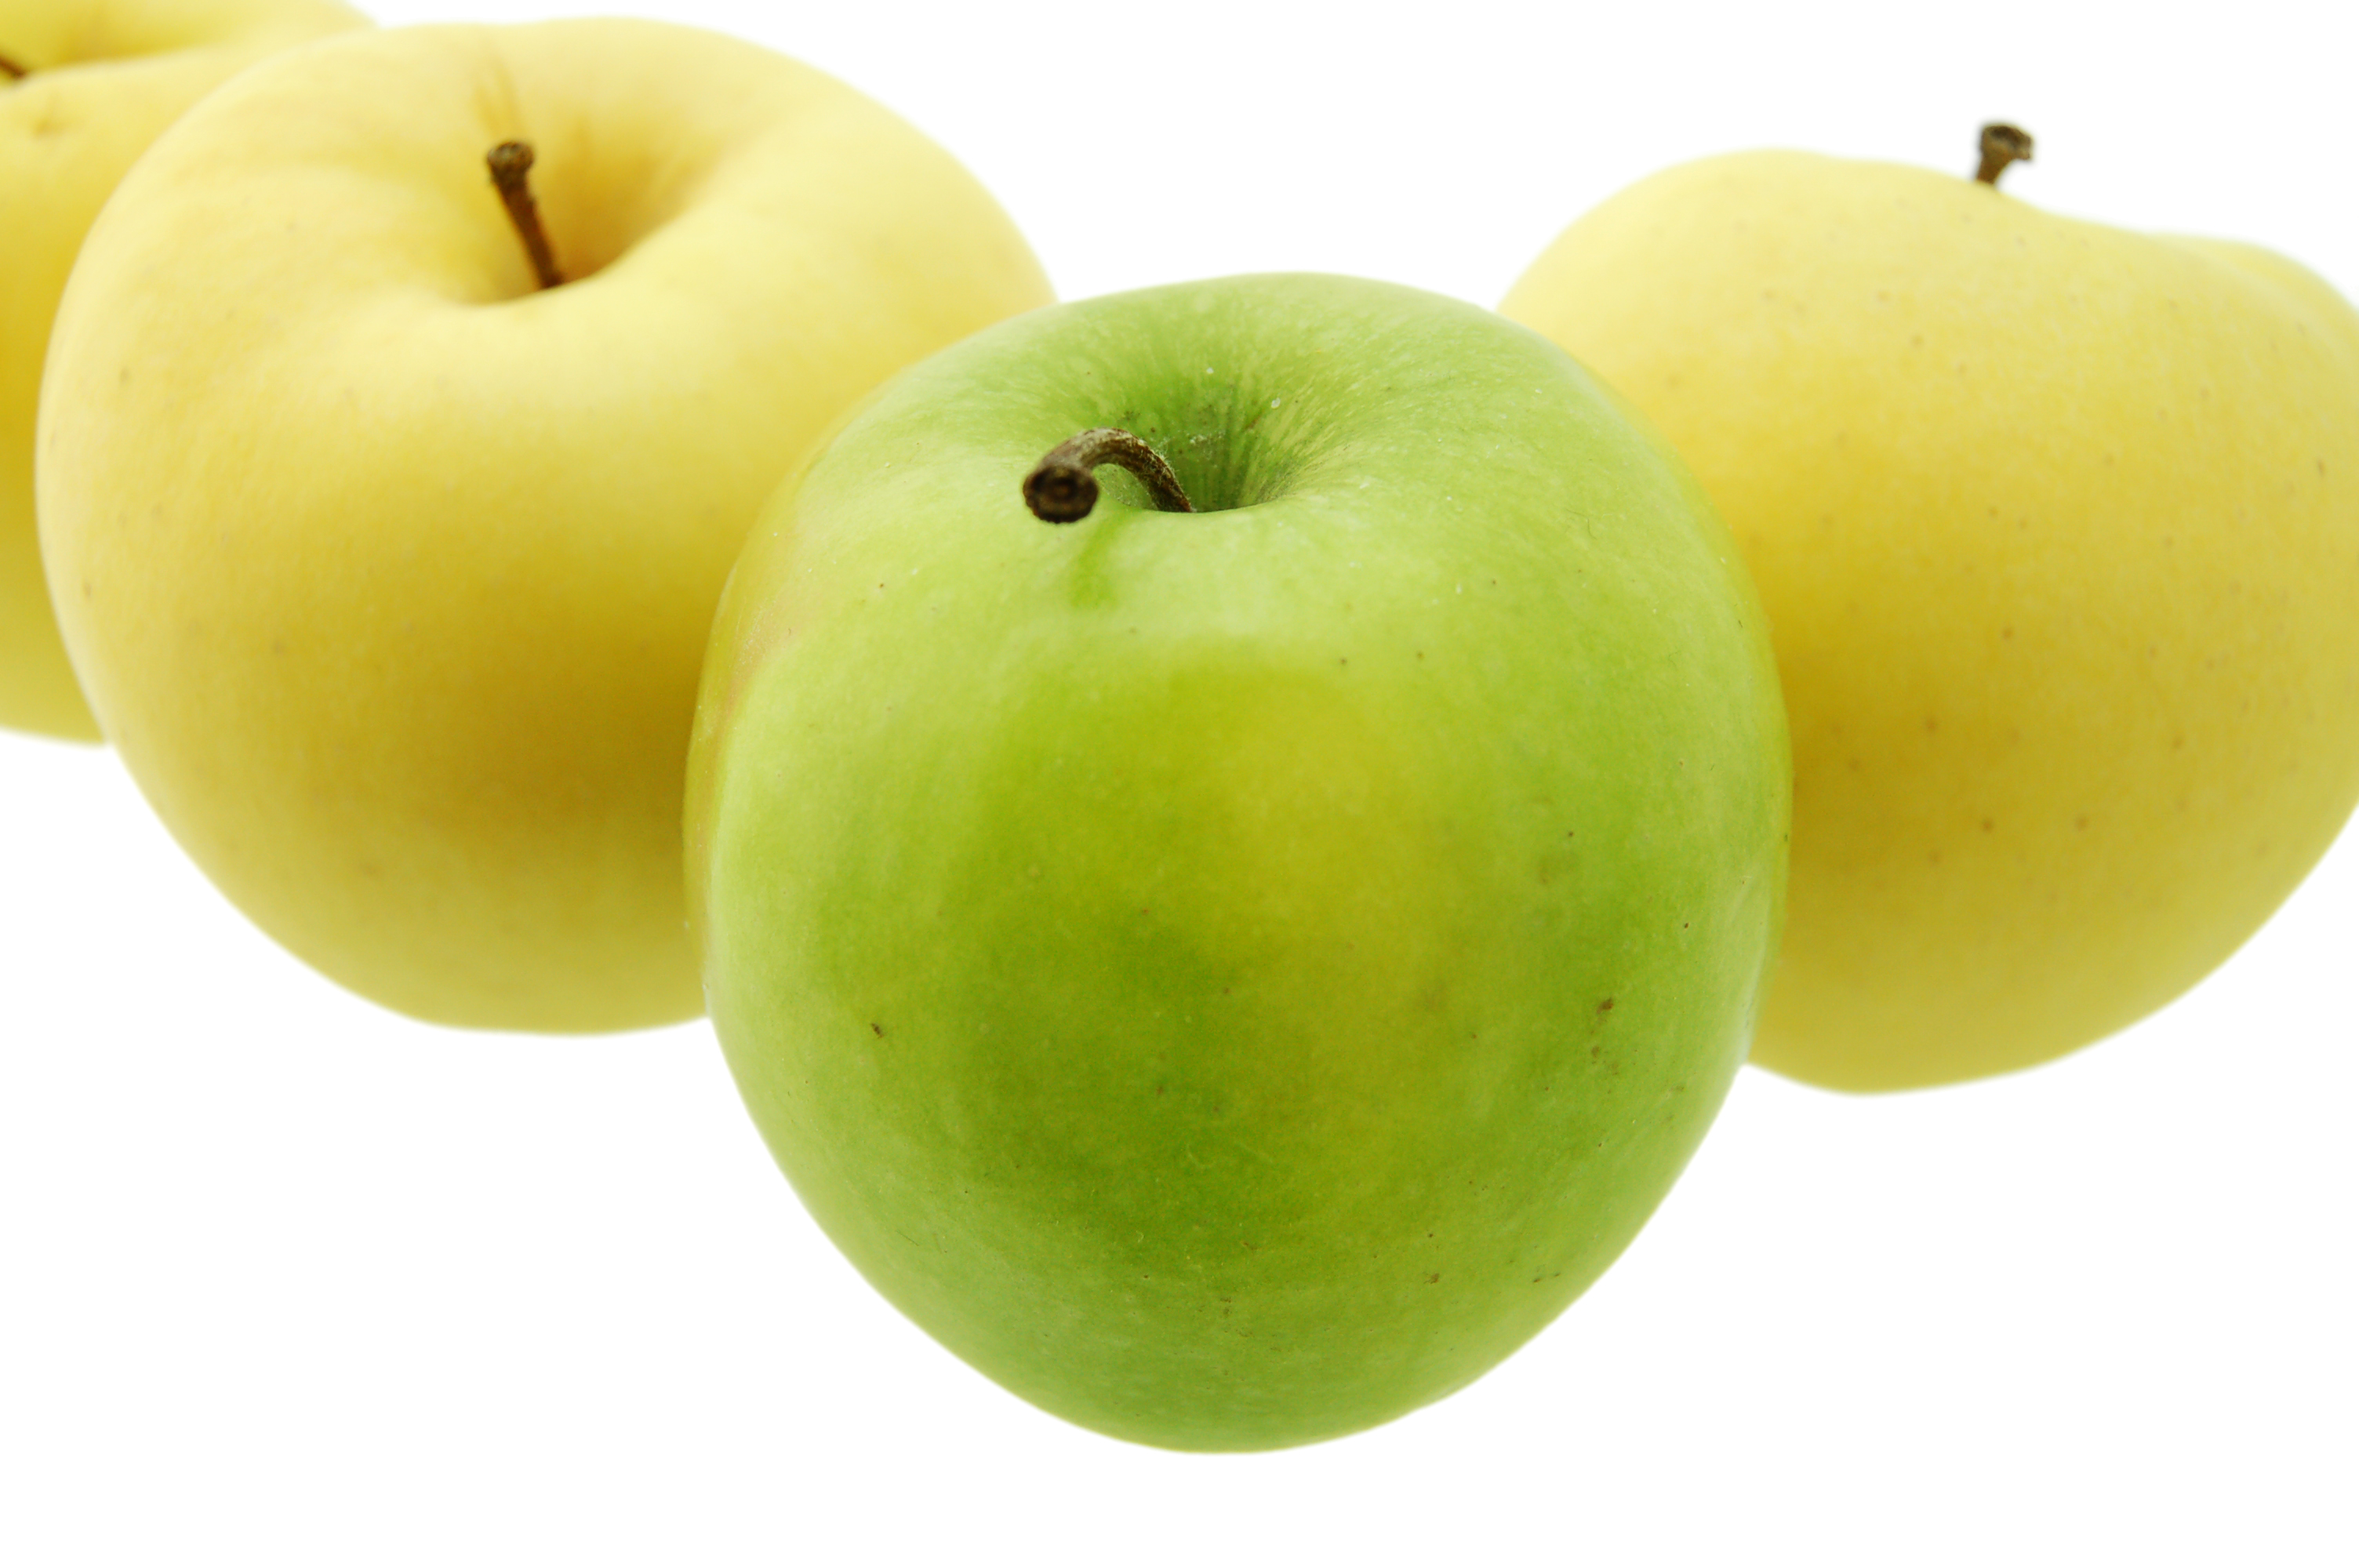 Yellow and green apples photo